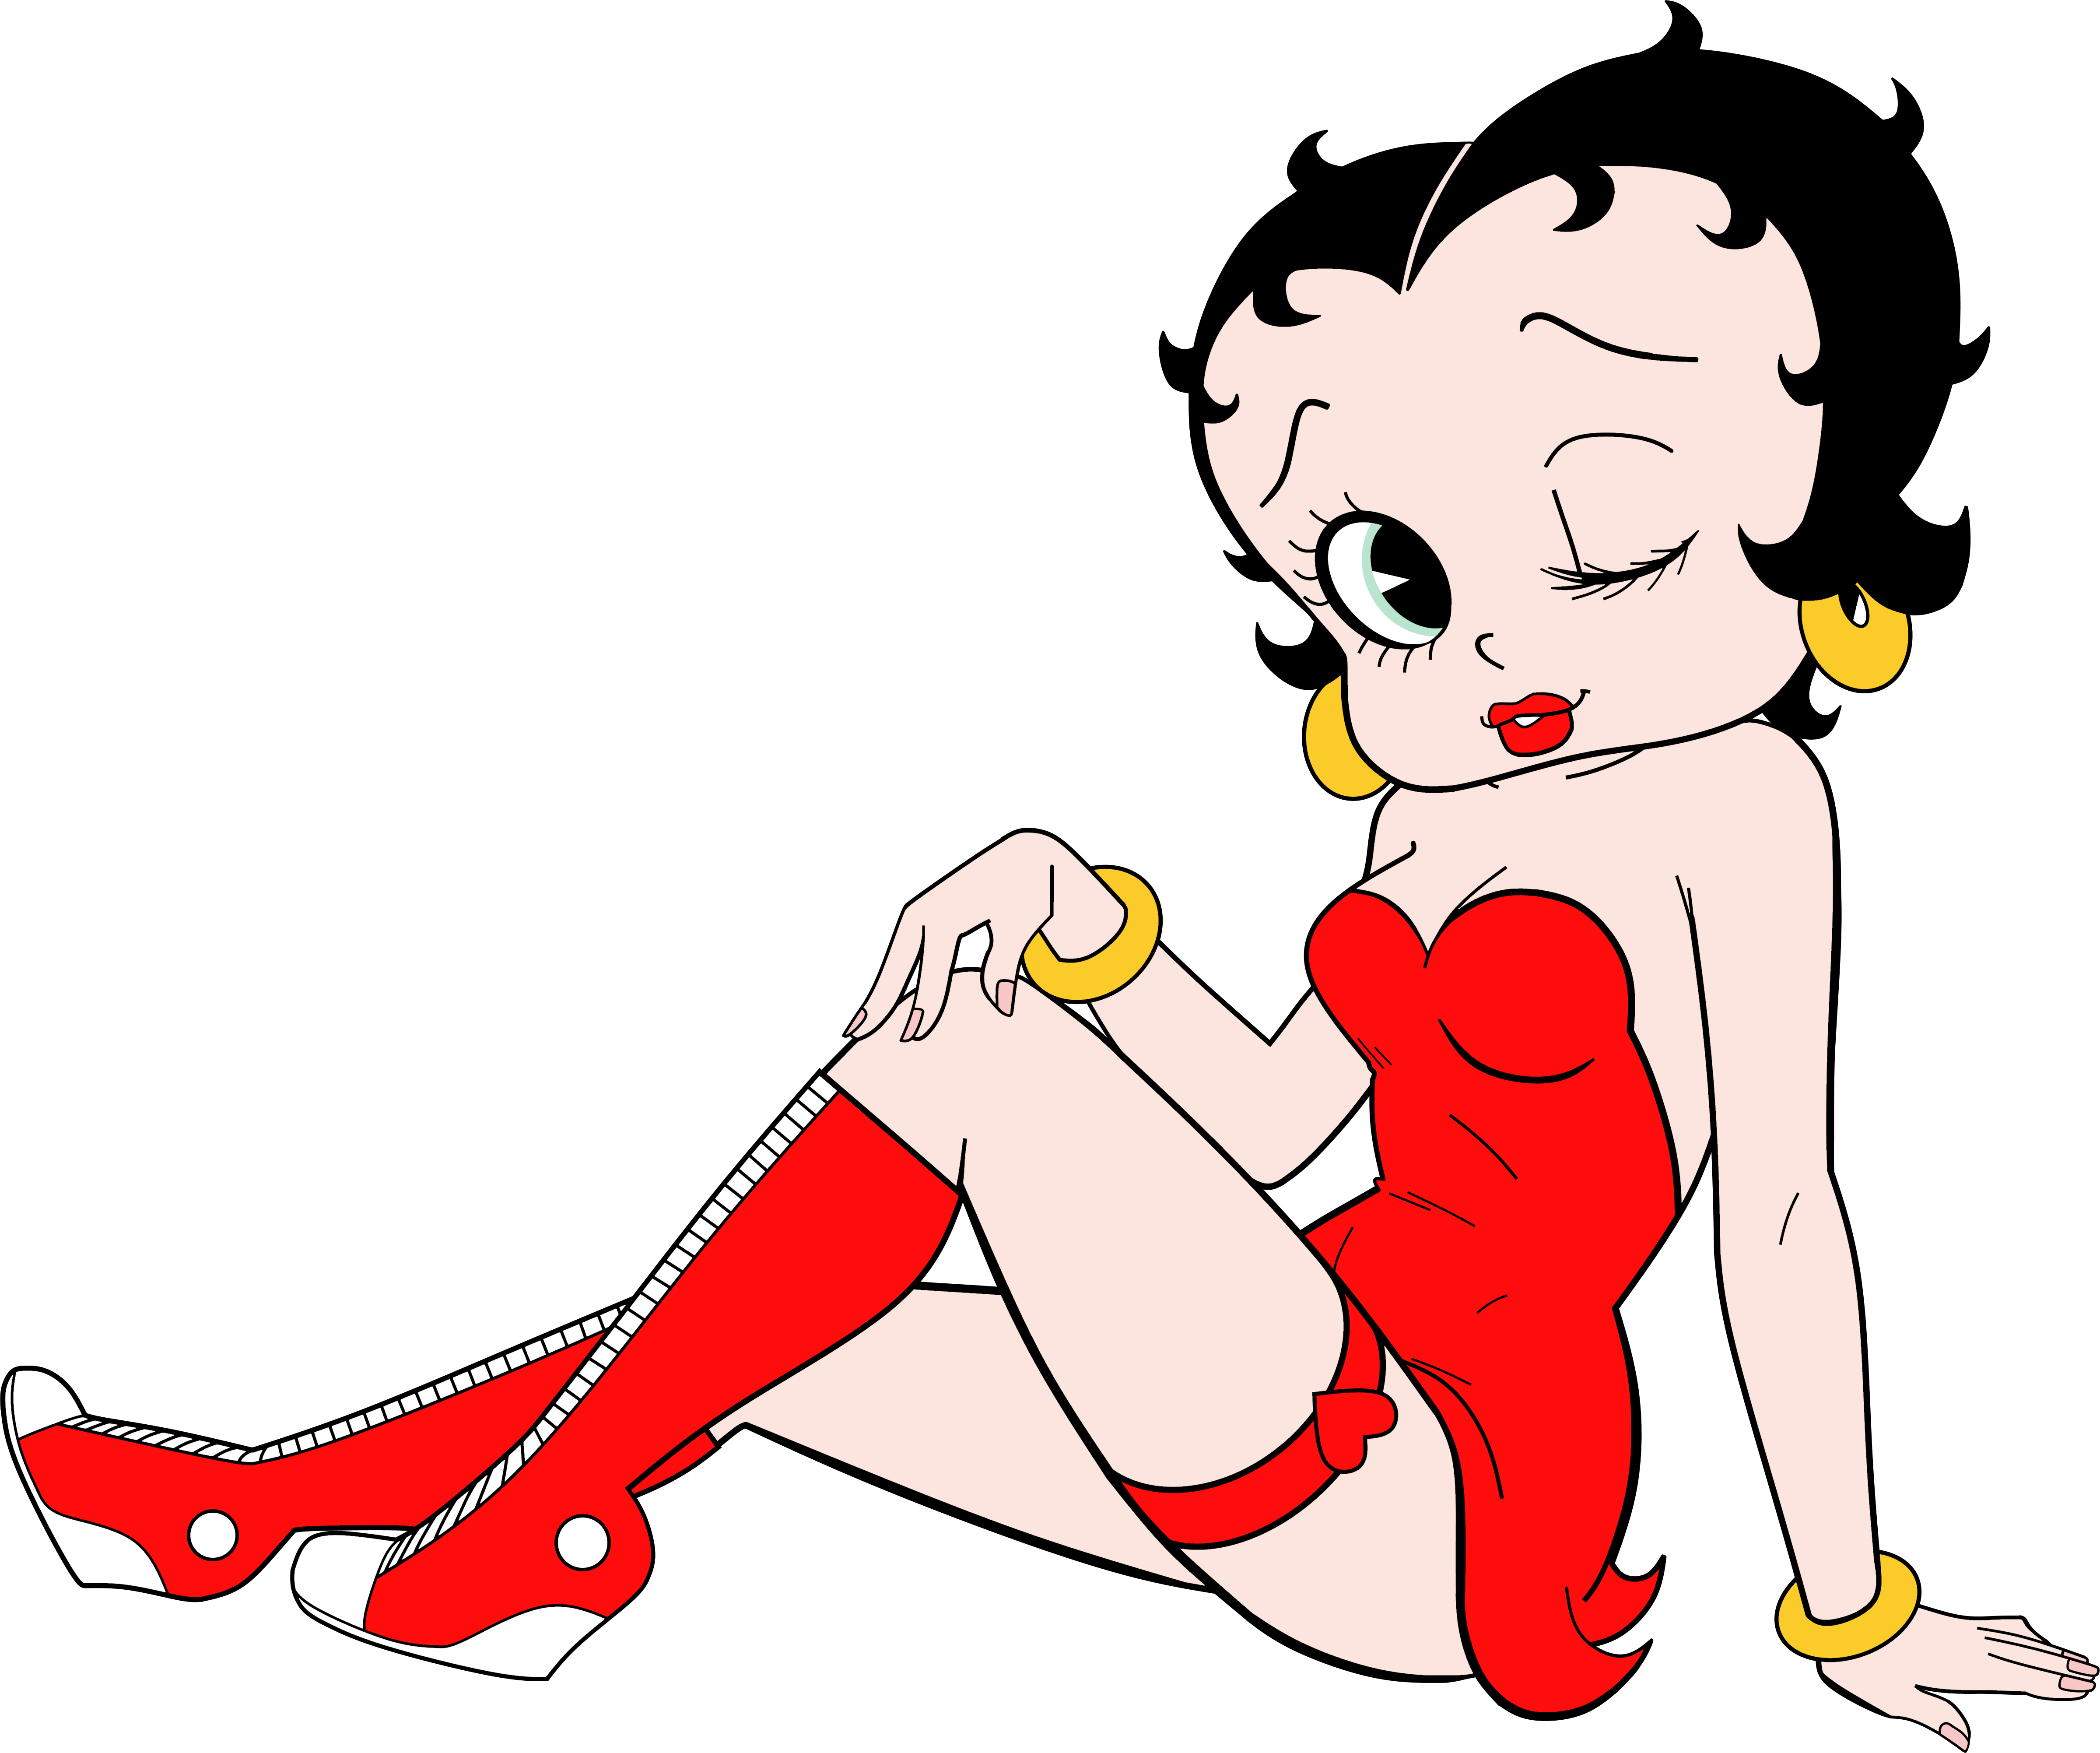 Betty Boop Images on Fanpop.